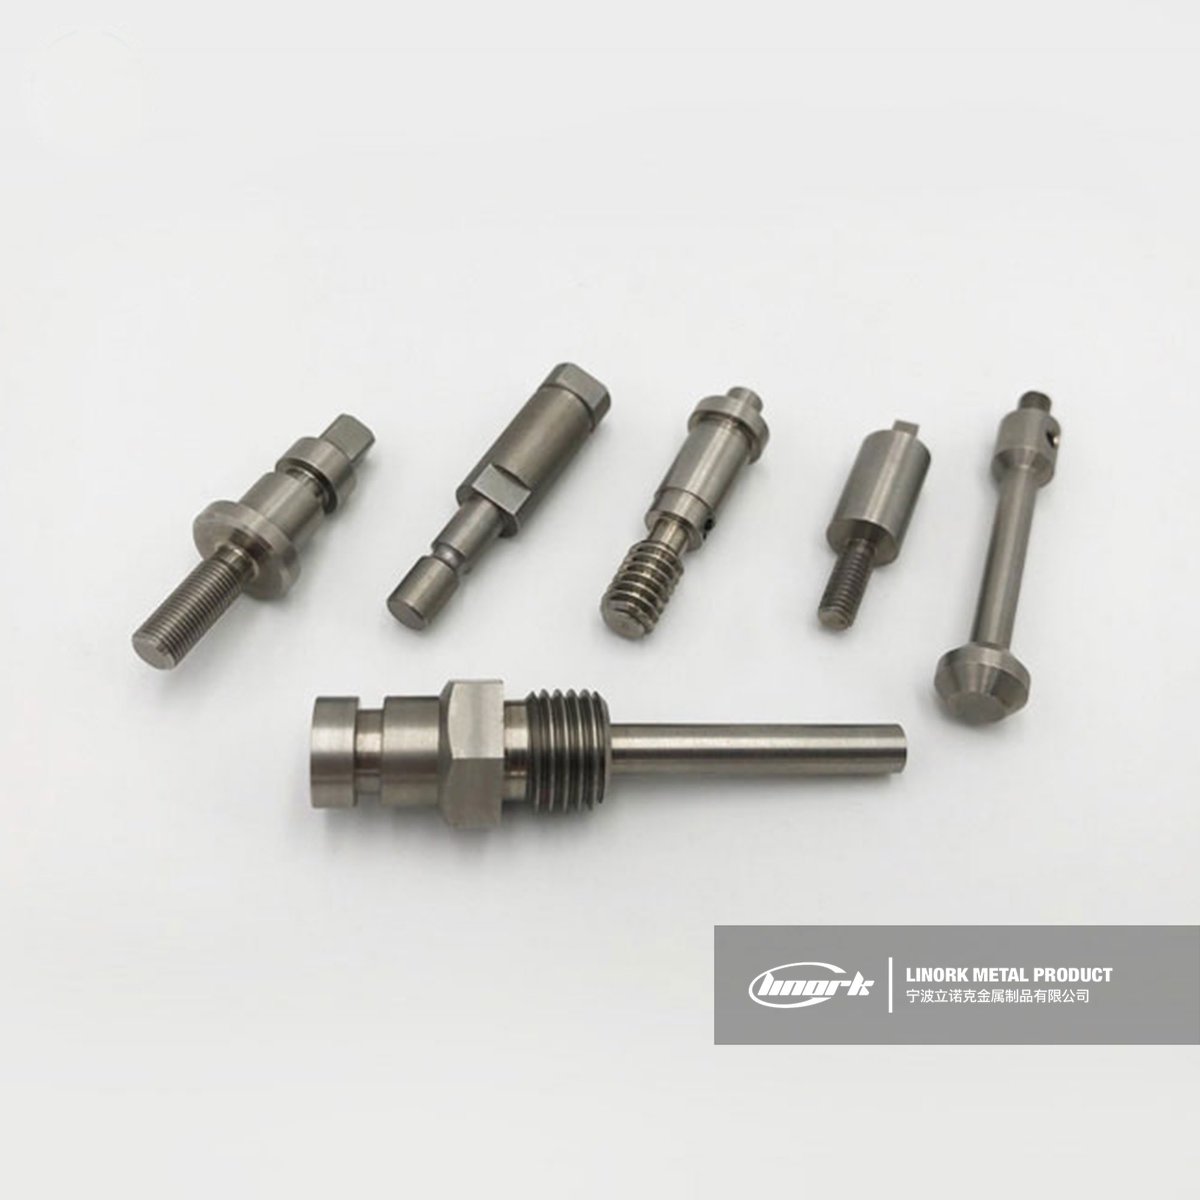 Custom CNC Machining Precision Bolts High Quality Customized Parts

linork.com

#cnc #machine #cncmachining #fastener #tools #precision #bolt #screw #shaft #carbonsteel #stainlesssteel #process #hardware #linork #manufacturer #specialty #fasteners #customized